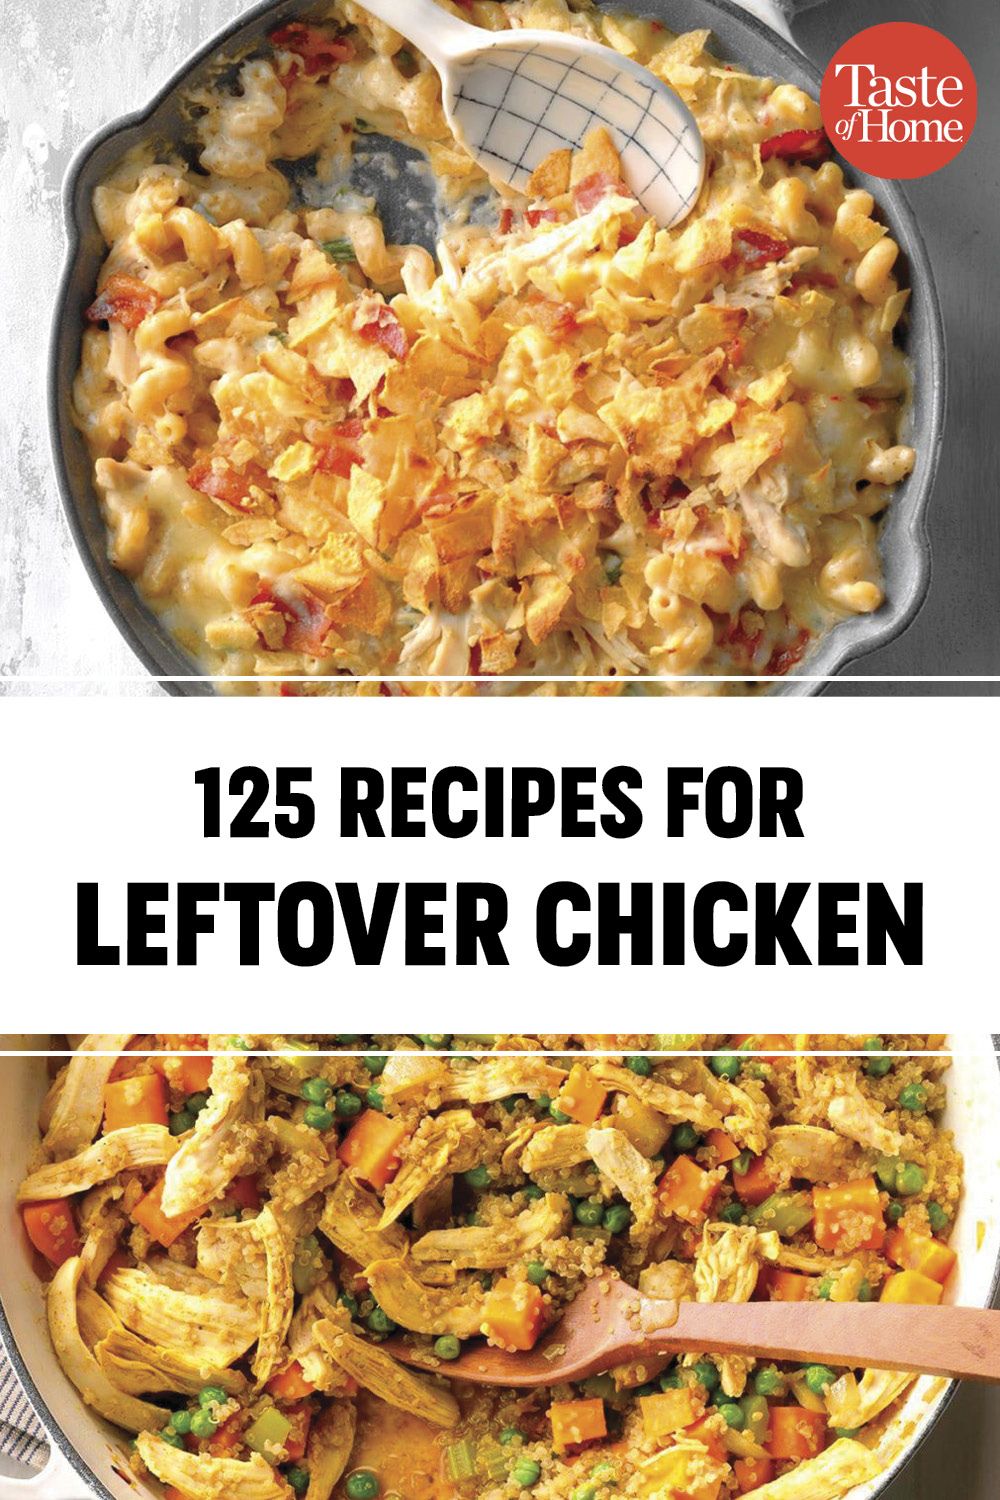 What To Make For Dinner With Leftovers